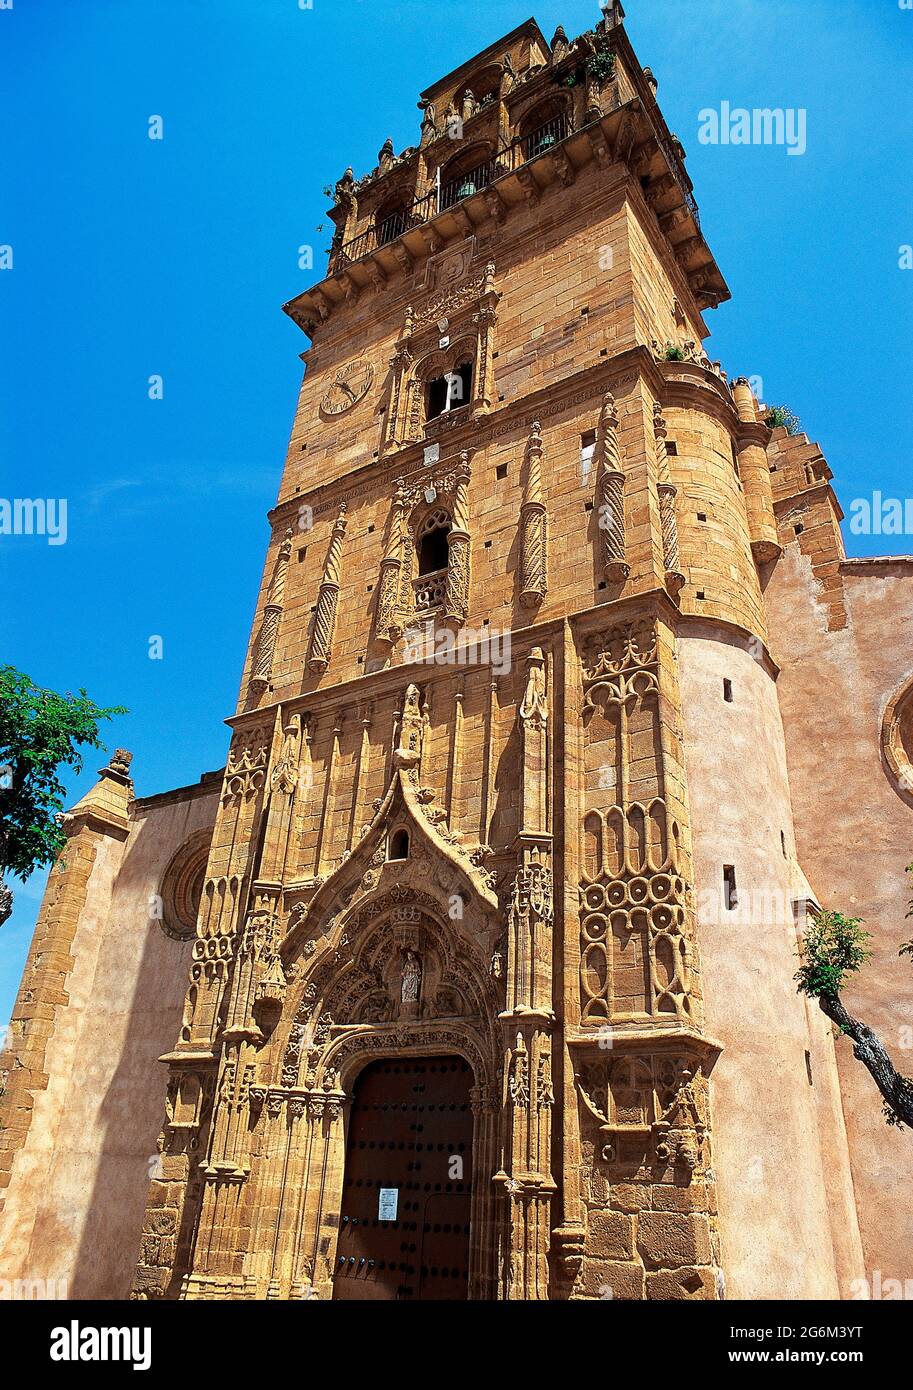 Spain, Extremadura, Badajoz province, Azuaga. Church of Our Lady of Consolation (Iglesia de Nuestra Señora de la Consolación). Built between the late 15th and mid-16th century in the Elizabethan Gothic style. Stock Photo